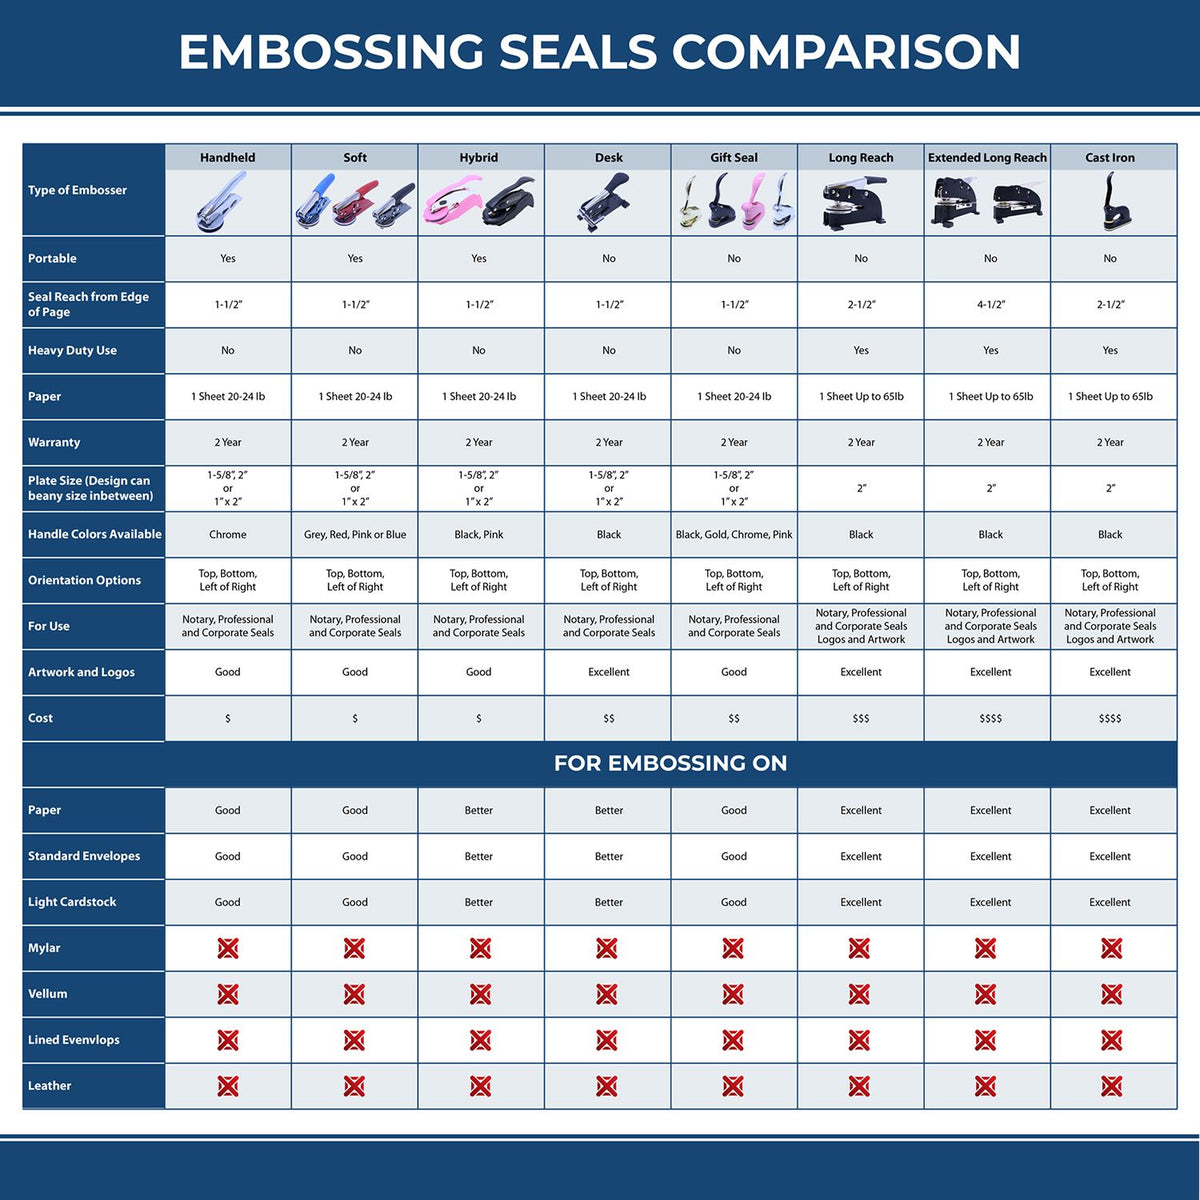 A comparison chart for the different types of mount models available for the State of Tennessee Soft Land Surveyor Embossing Seal.